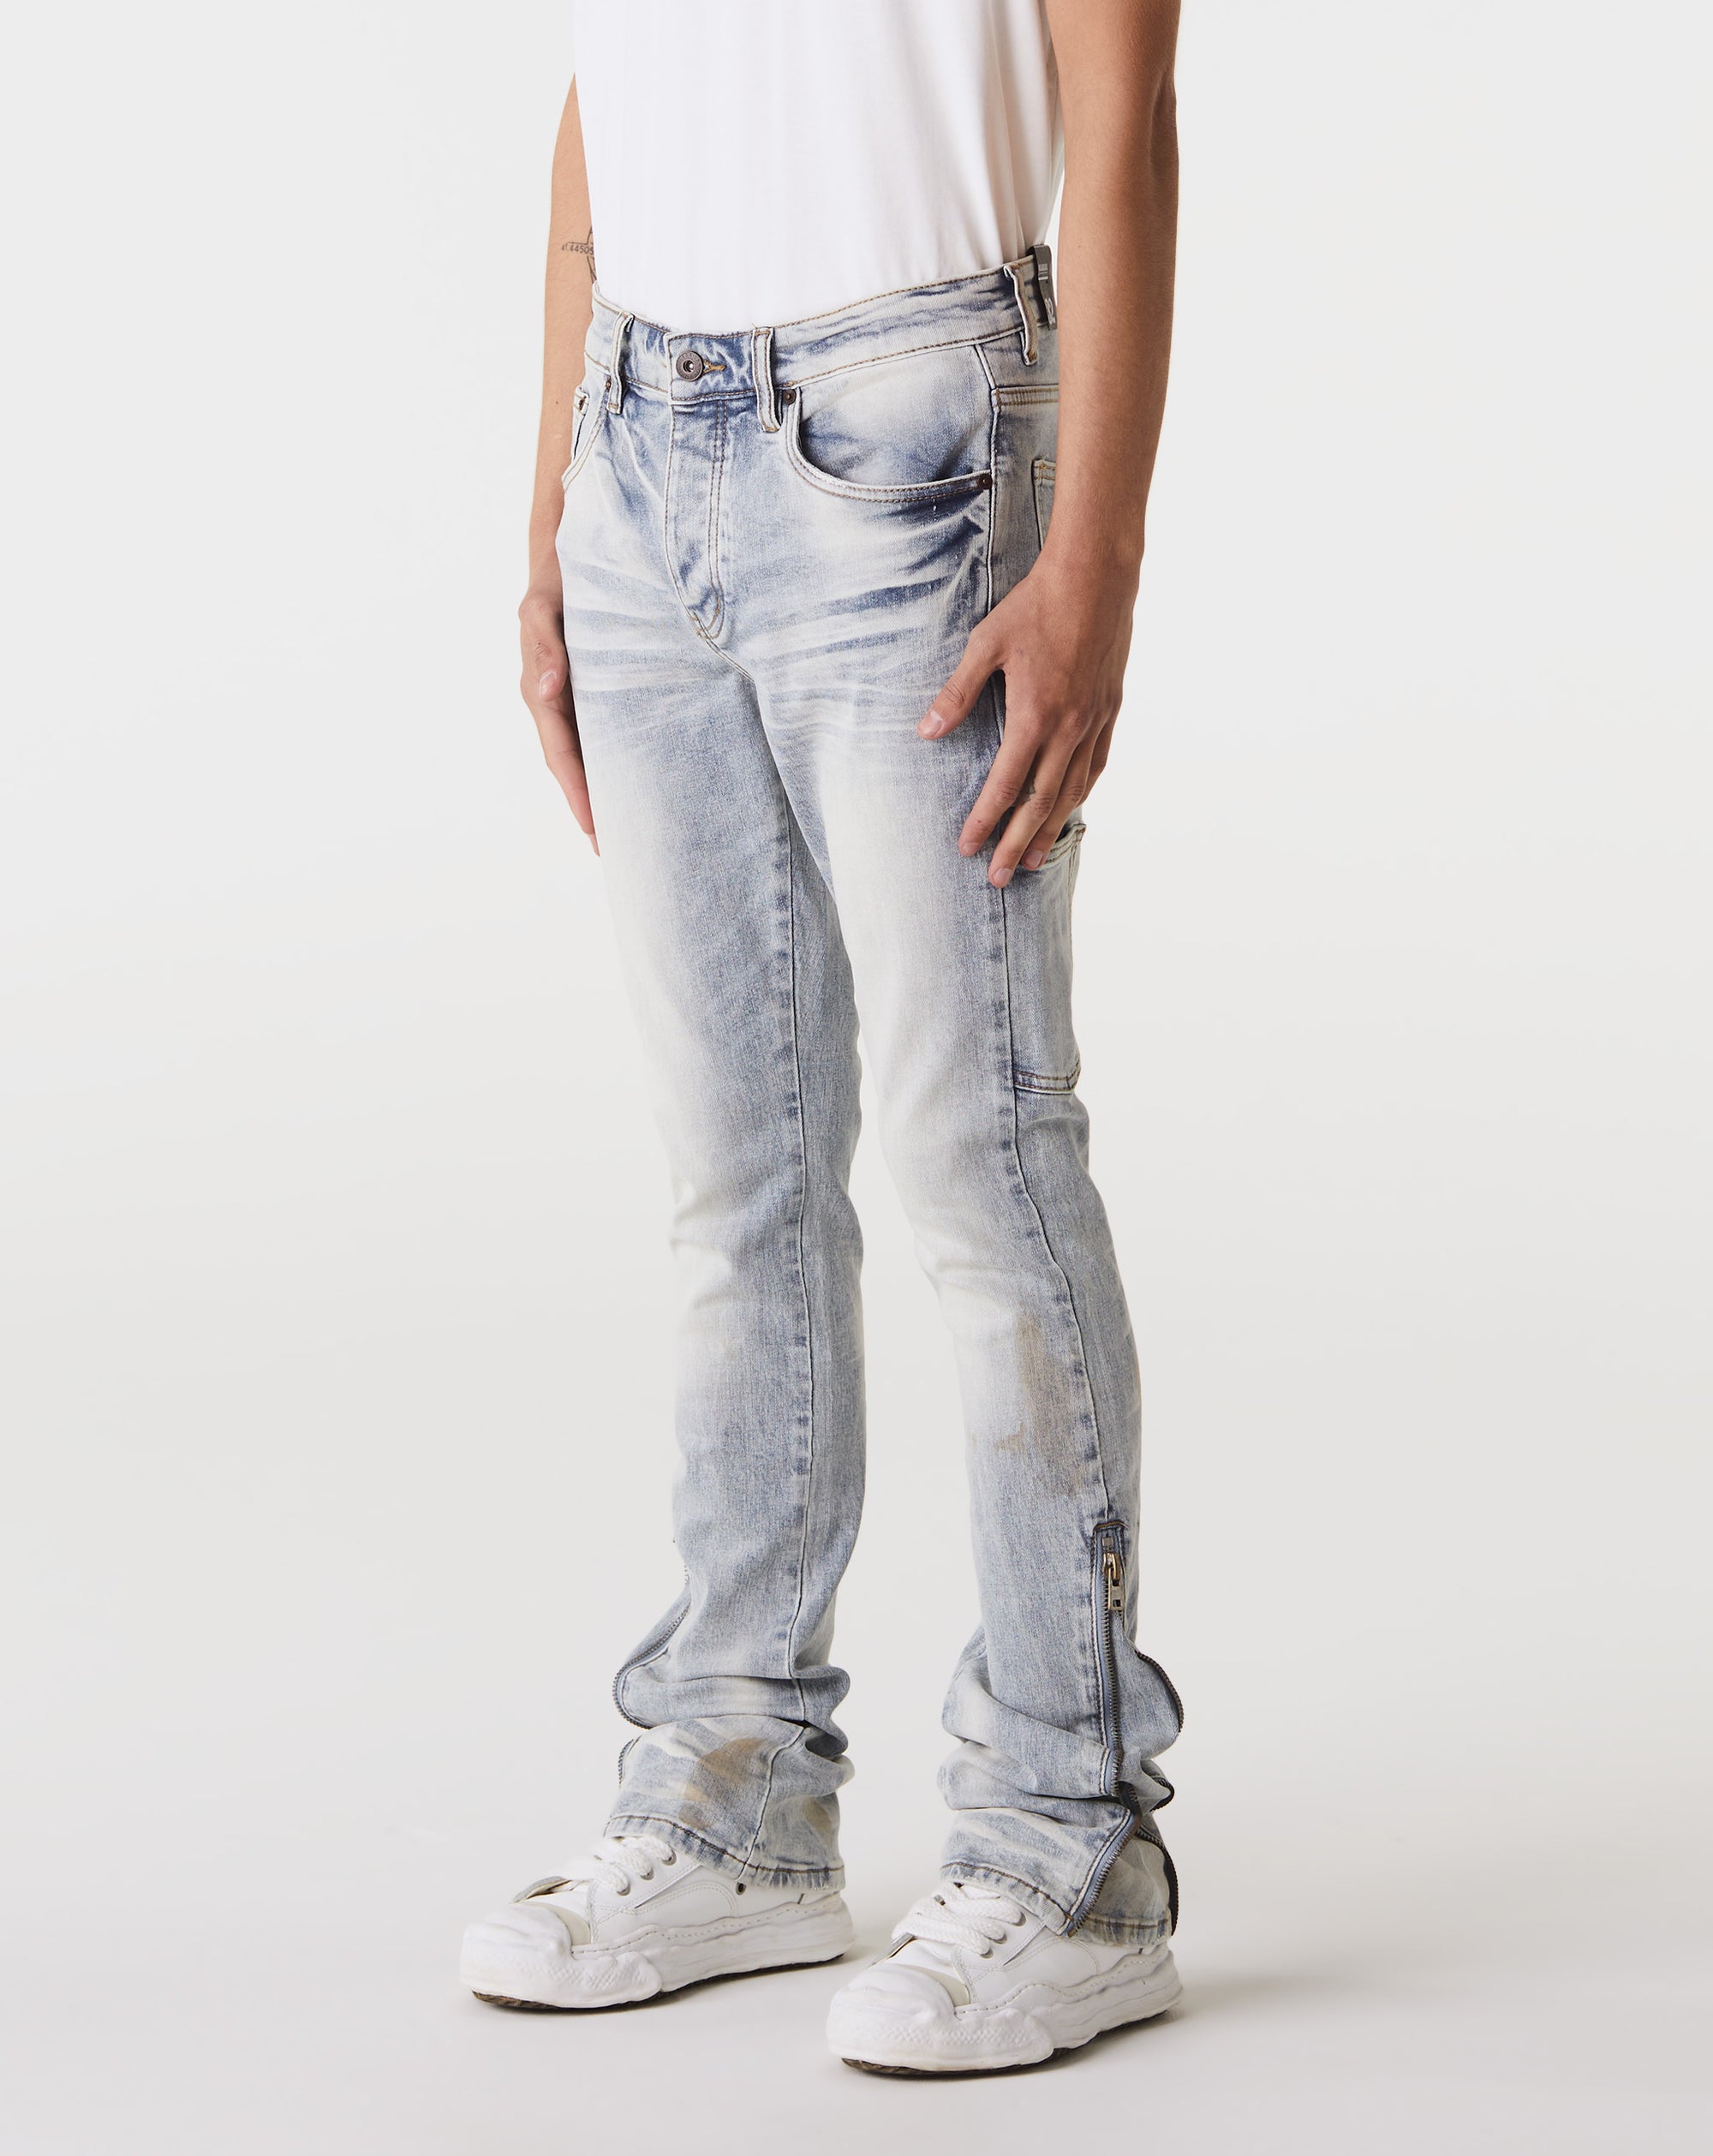 VALABASAS "Streamline" Stacked Flare Jean - Rule of Next Apparel